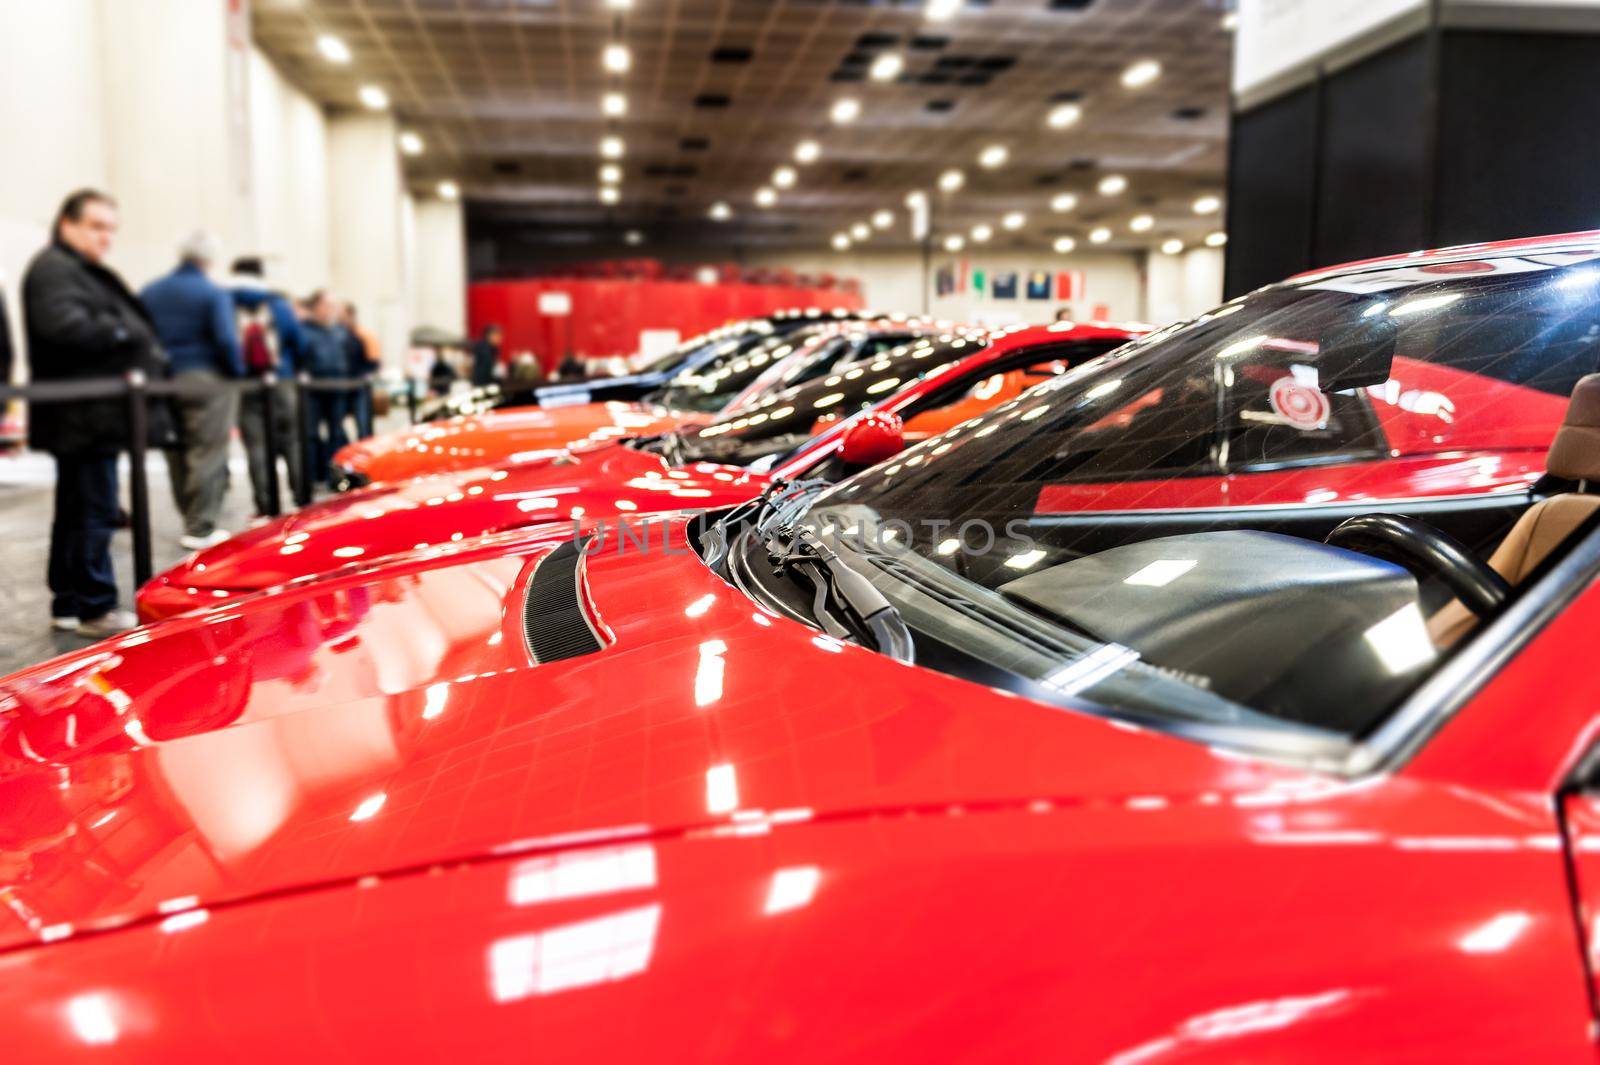 red cars in a showroom by cla78